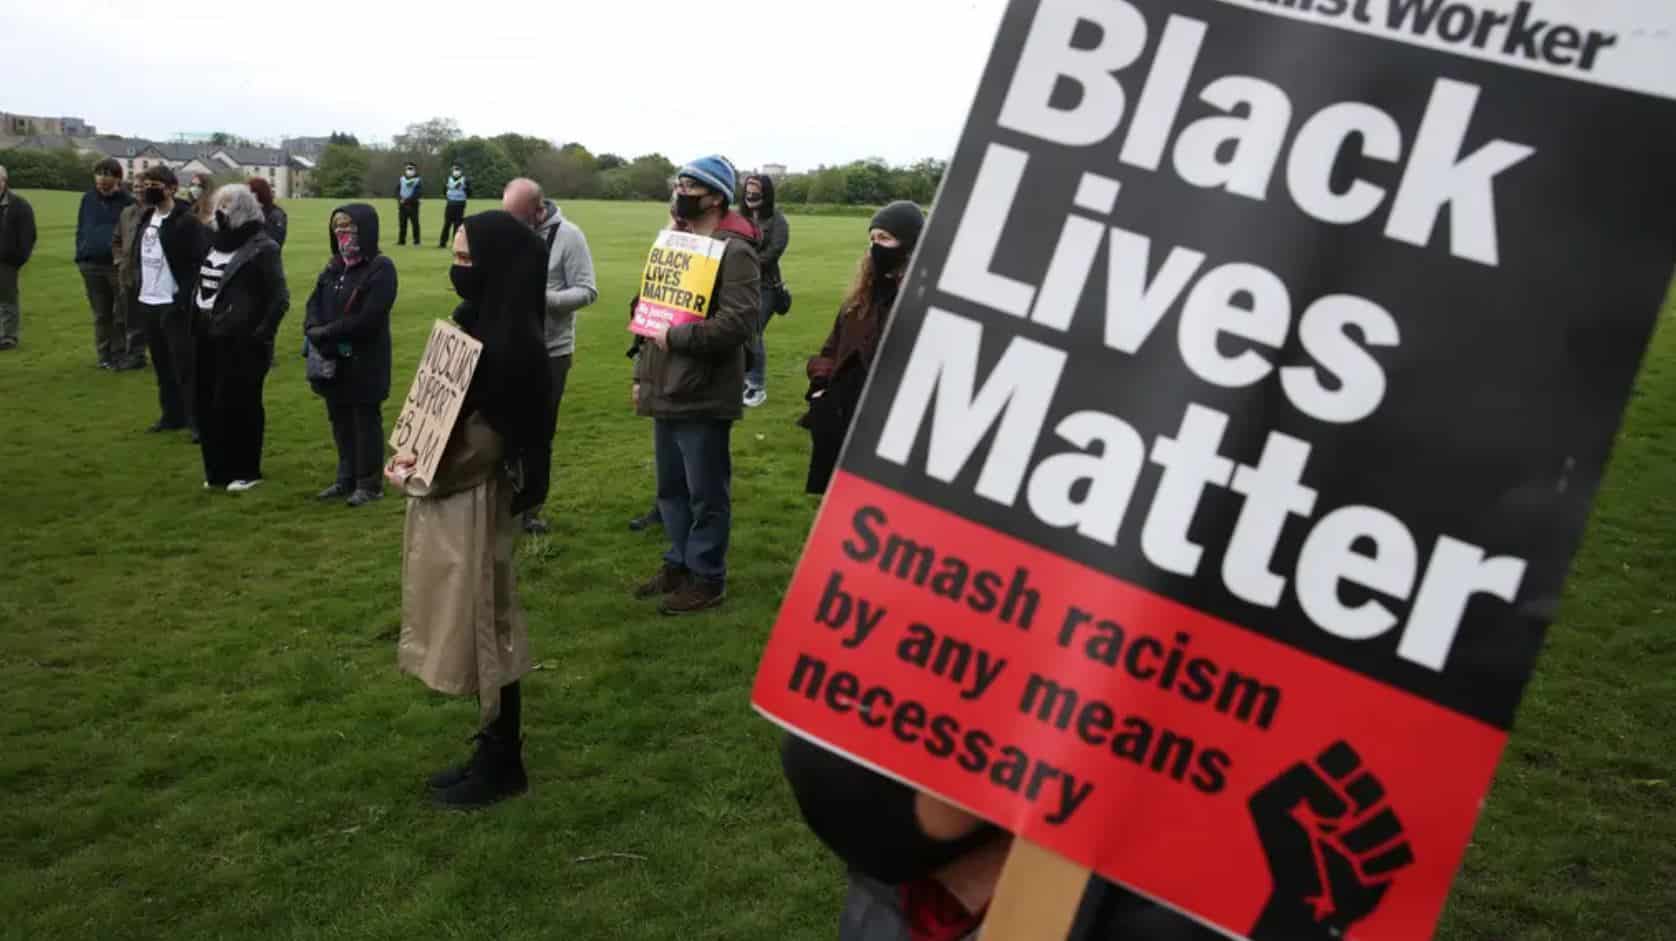 Research finds UK is far from a ‘racially just society’